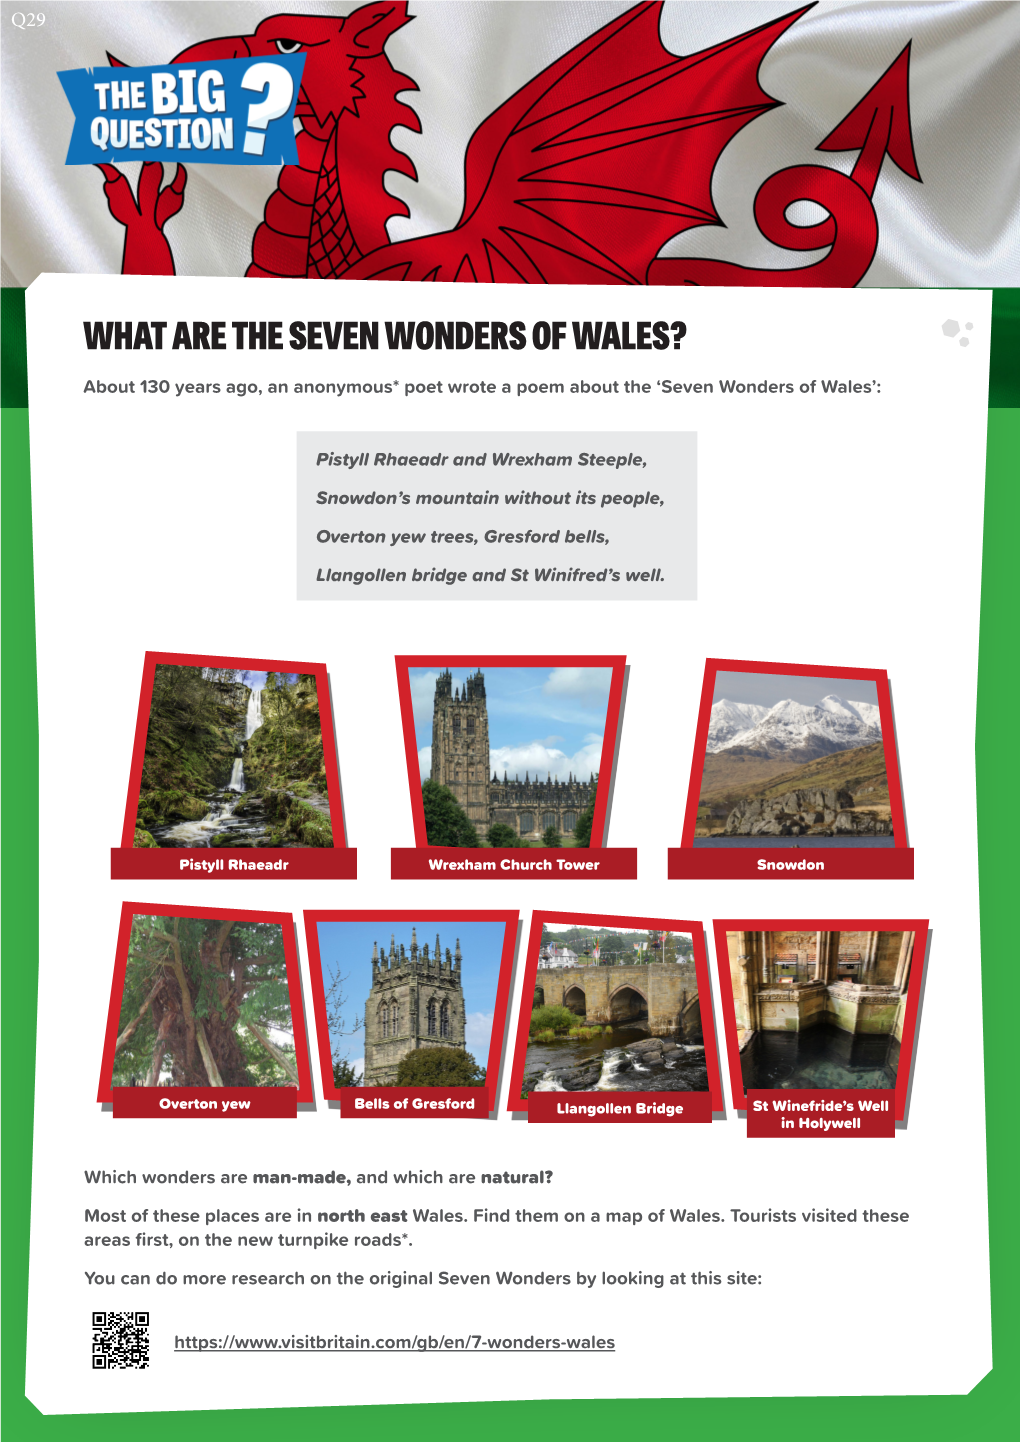 What Are the Seven Wonders of Wales?